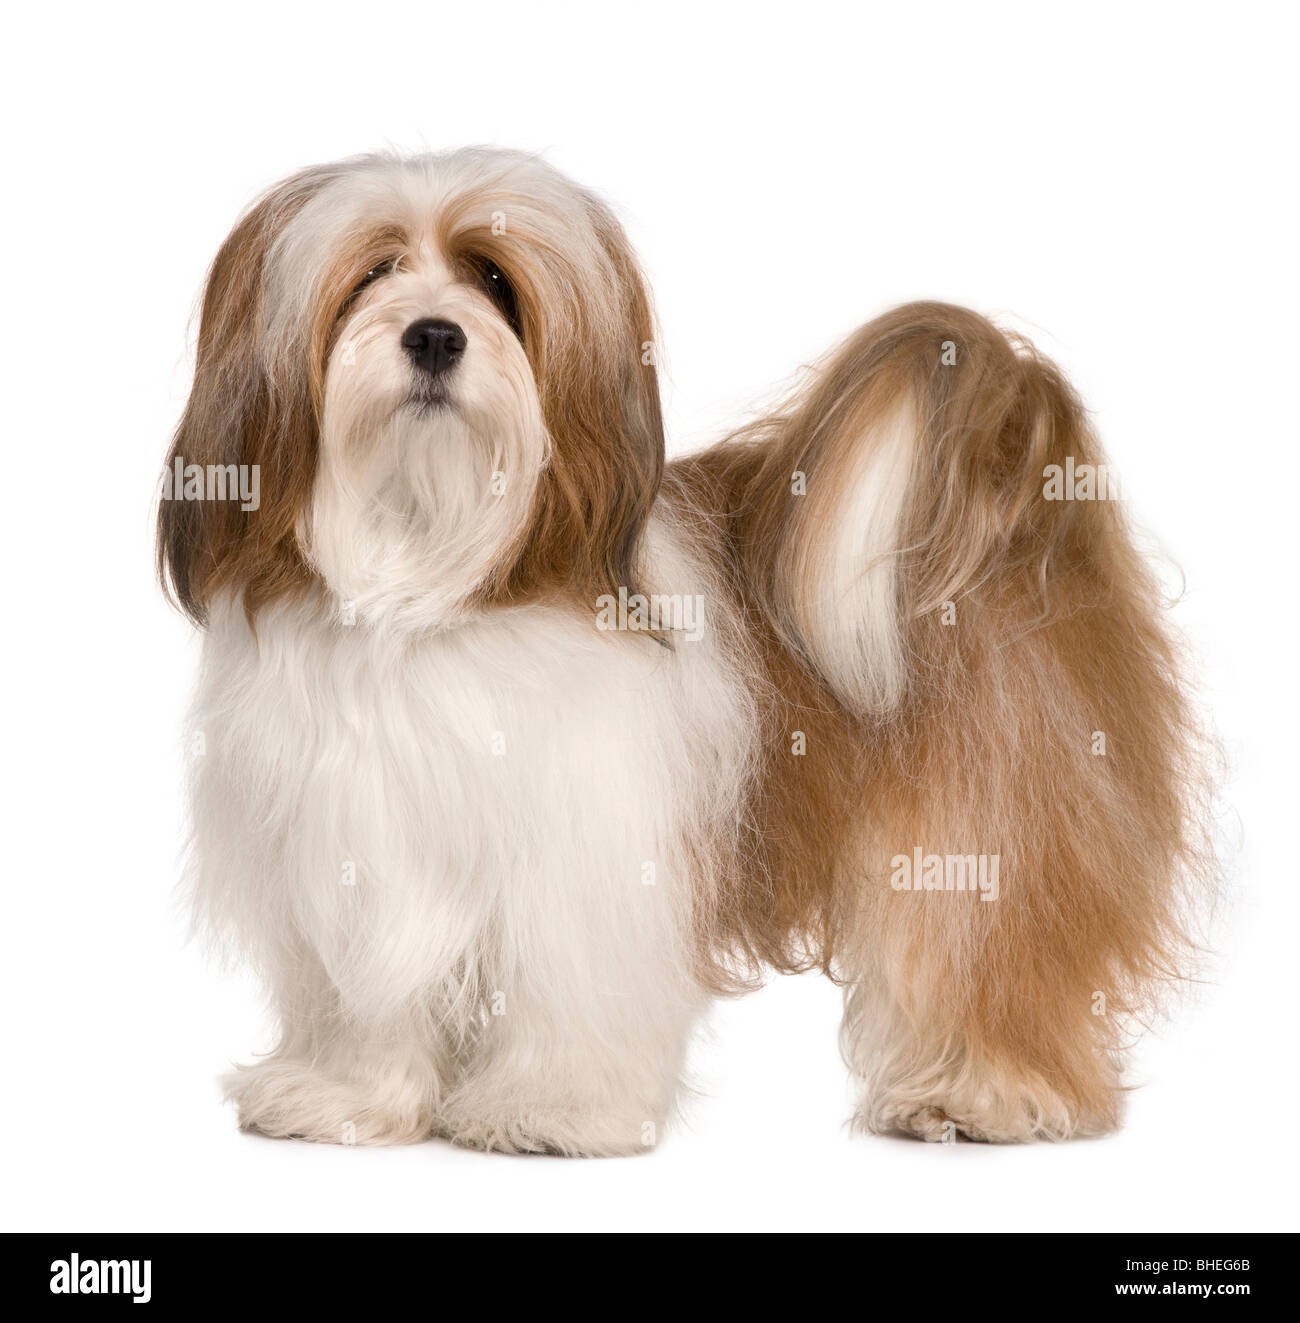 Lhasa apso, 1 year old, standing in front of white background Stock Photo